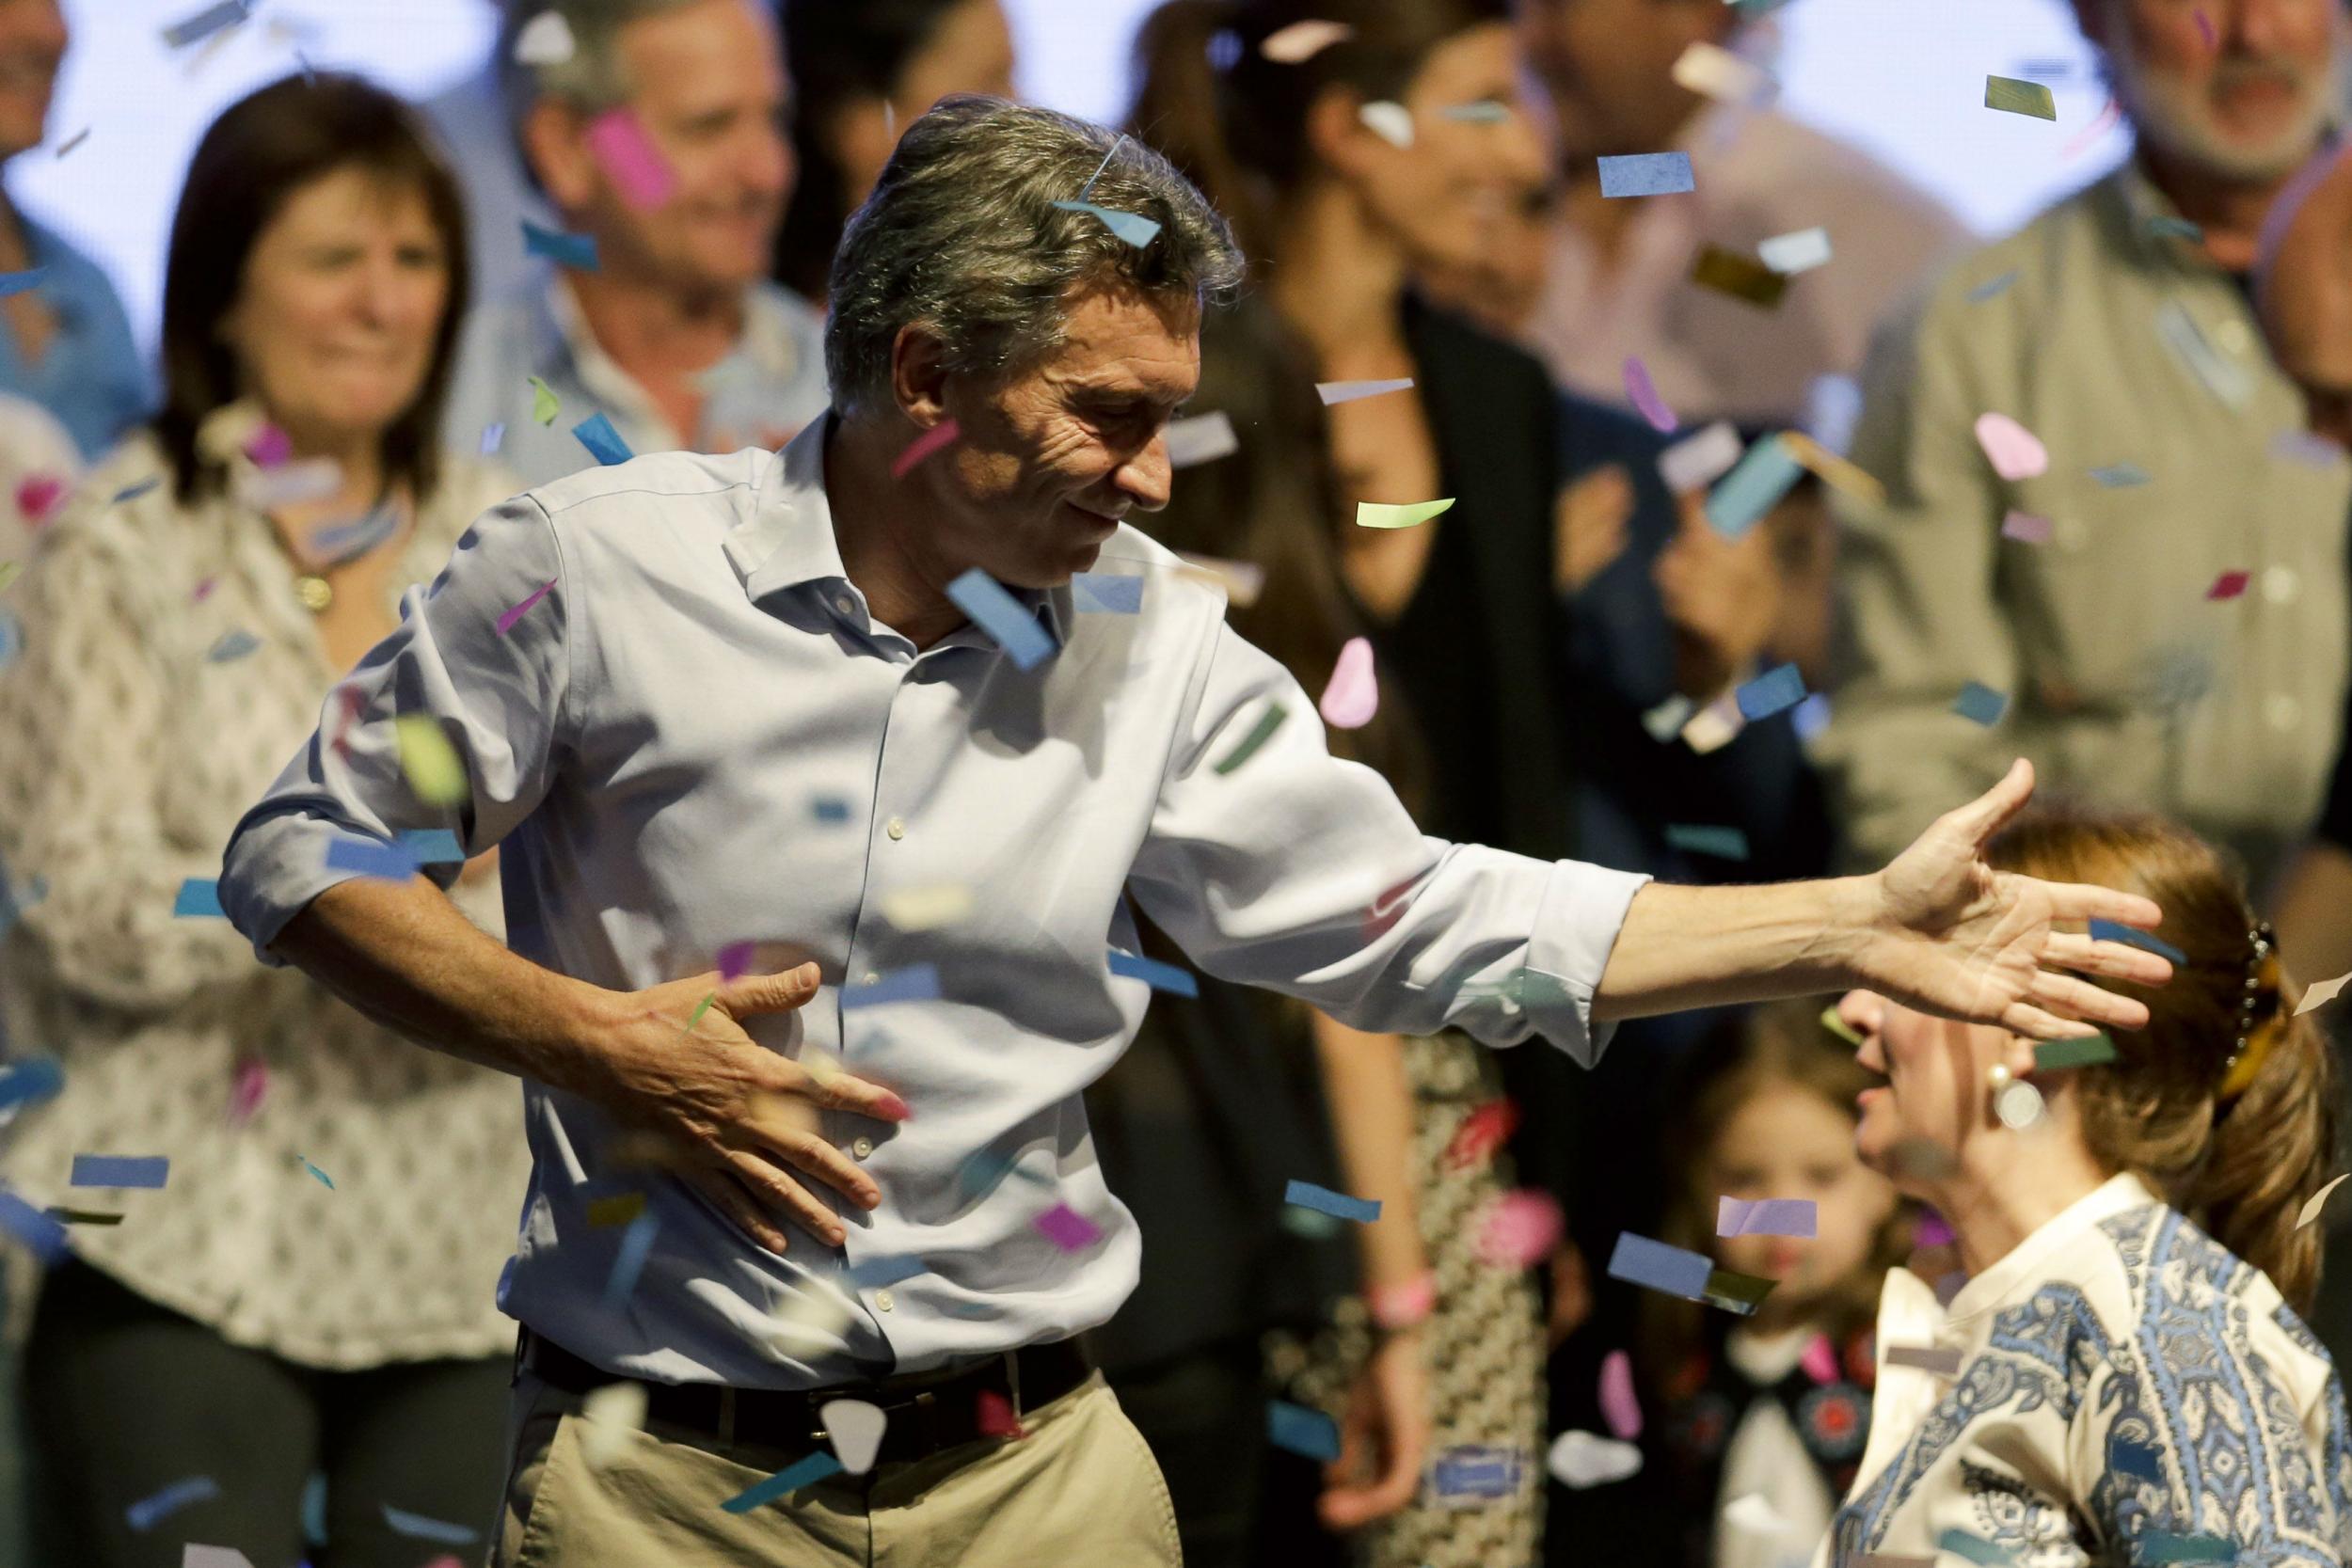 Top opposition presidential candidate Mauricio Macri dances, cheered by supporters in Buenos Aires, Argentina, Sunday, Oct. 25, 2015.